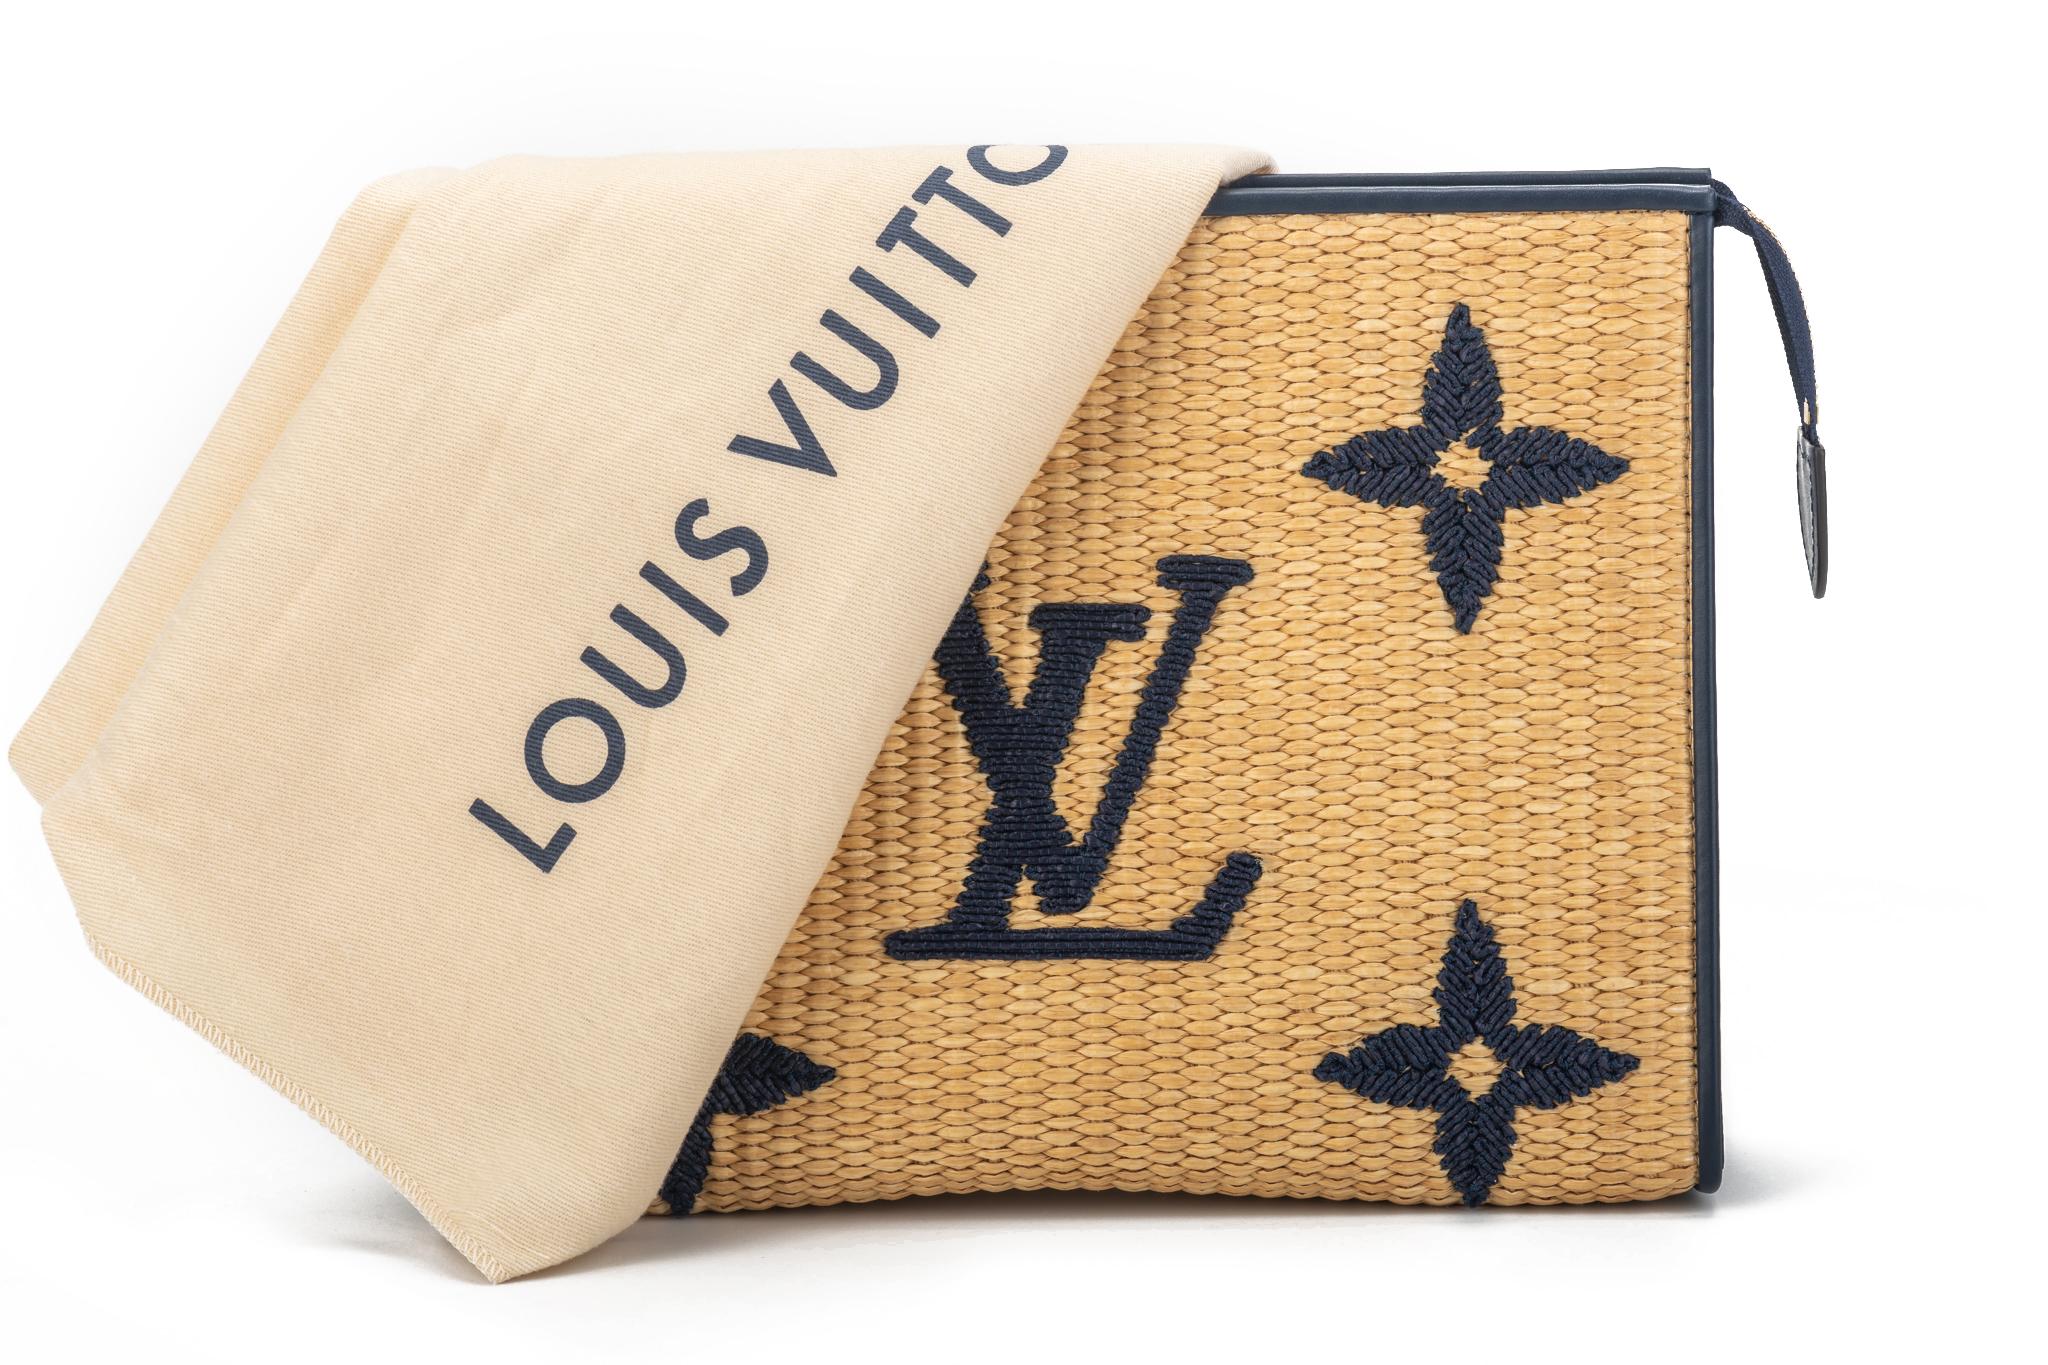 Louis Vuitton limited edition raffia clutch with navy blue leather trimming and oversize embroidered logo. Striped fabric interior lining. Brand new with original dust cover and box.
